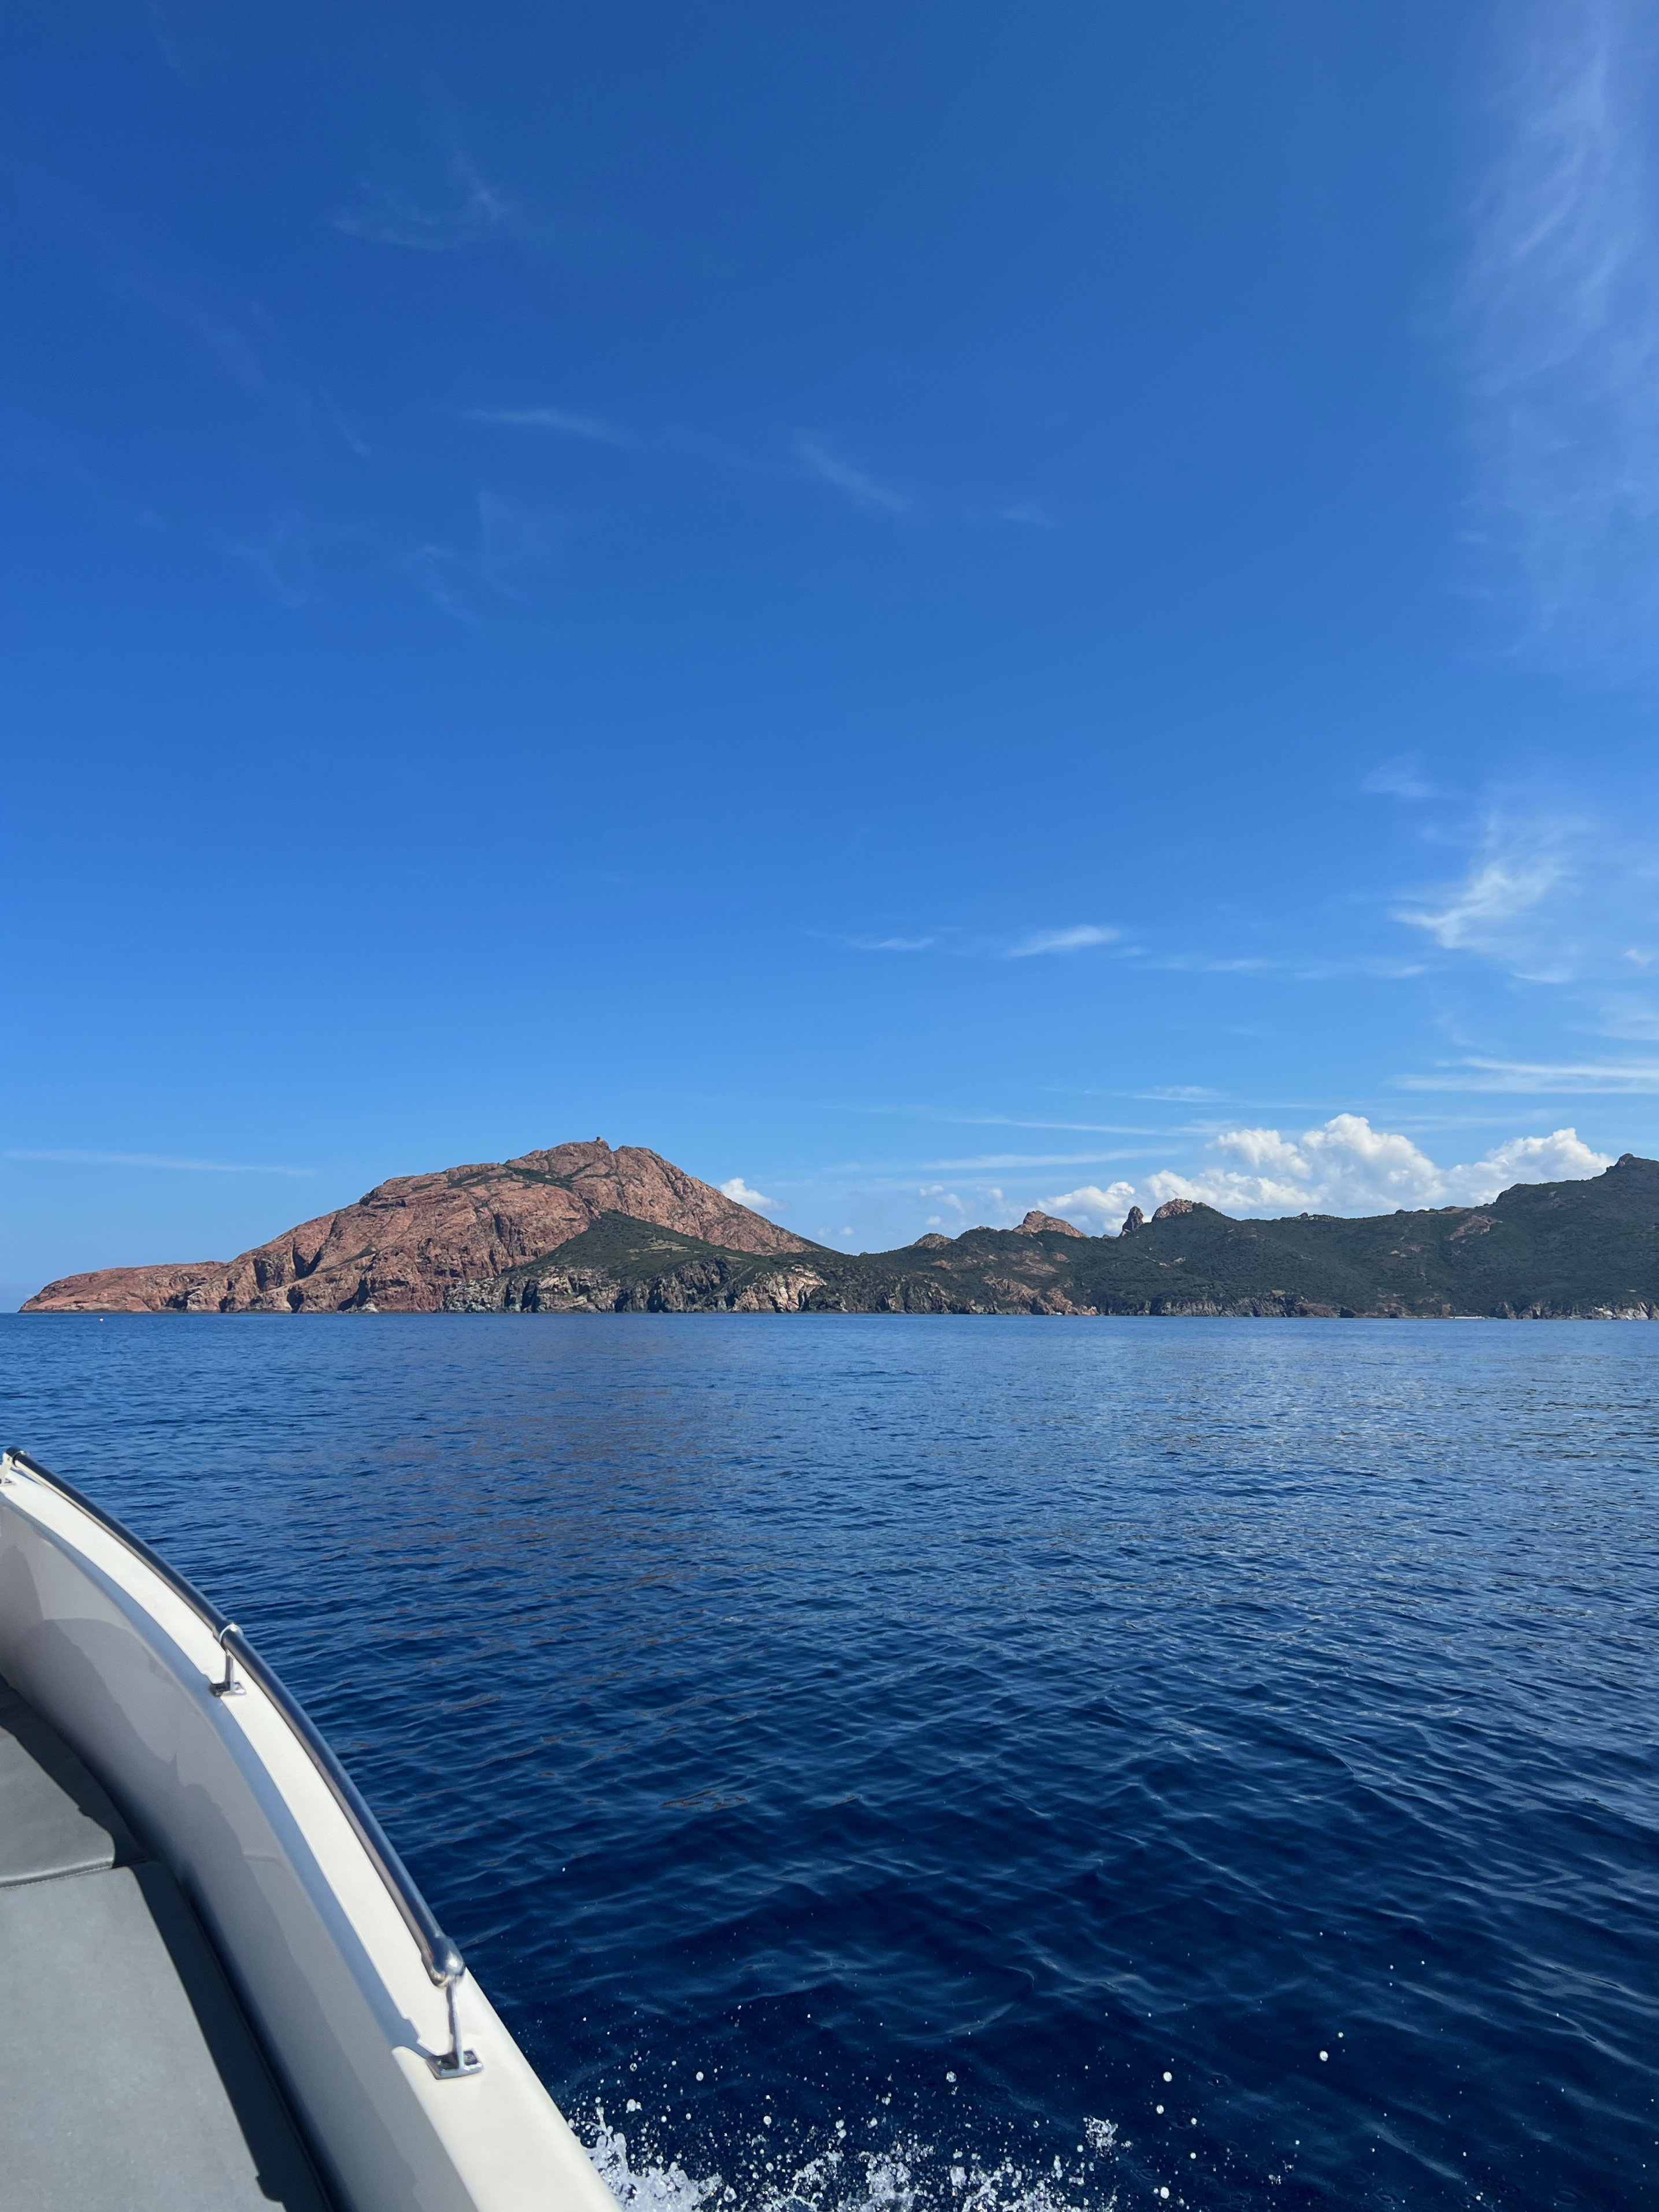 View of the Calanches de Piana from the boat